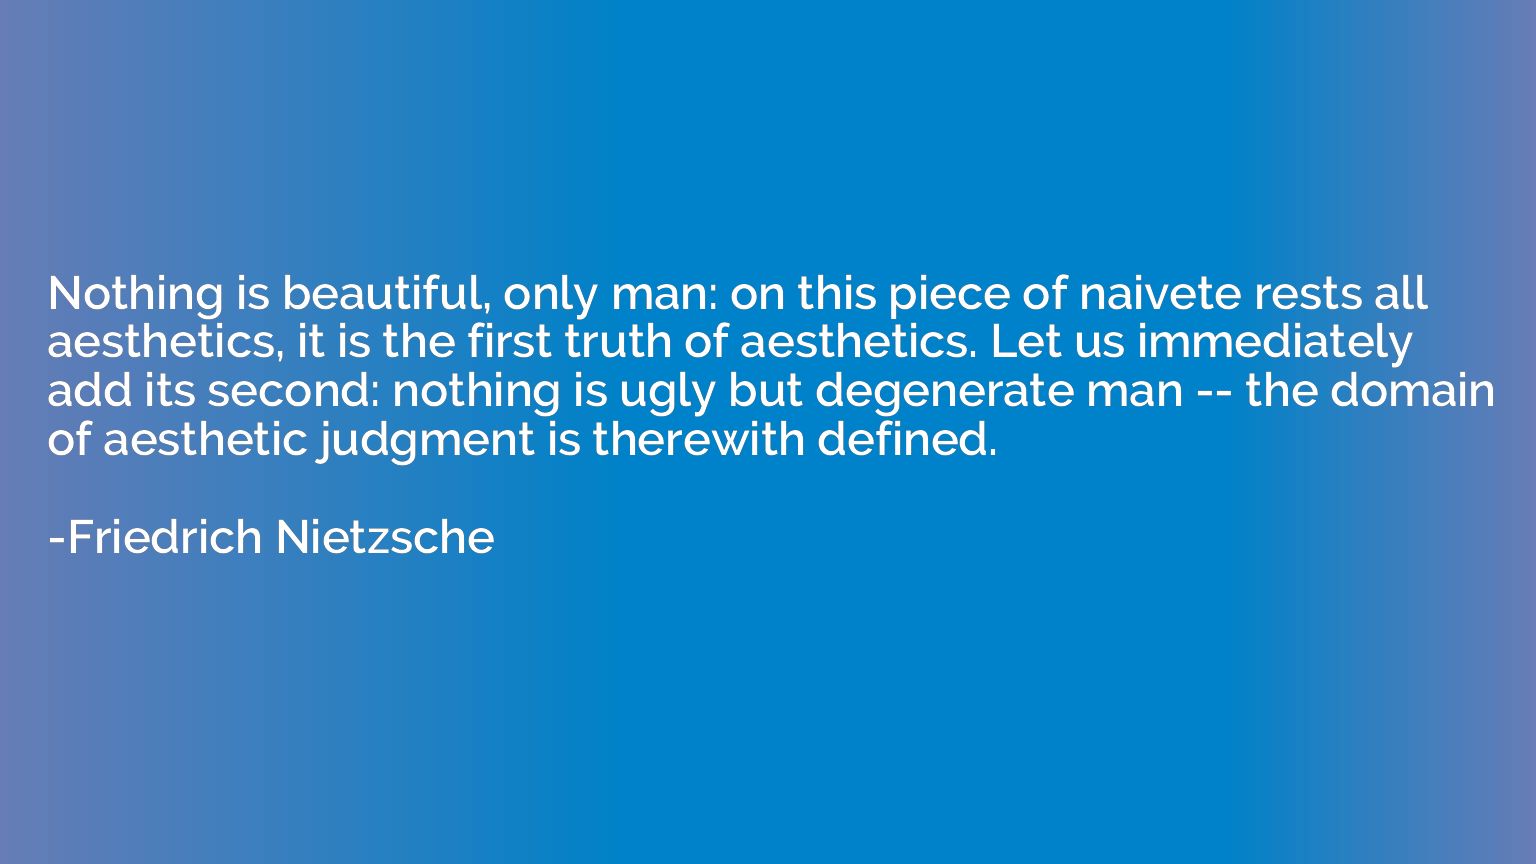 Nothing is beautiful, only man: on this piece of naivete res